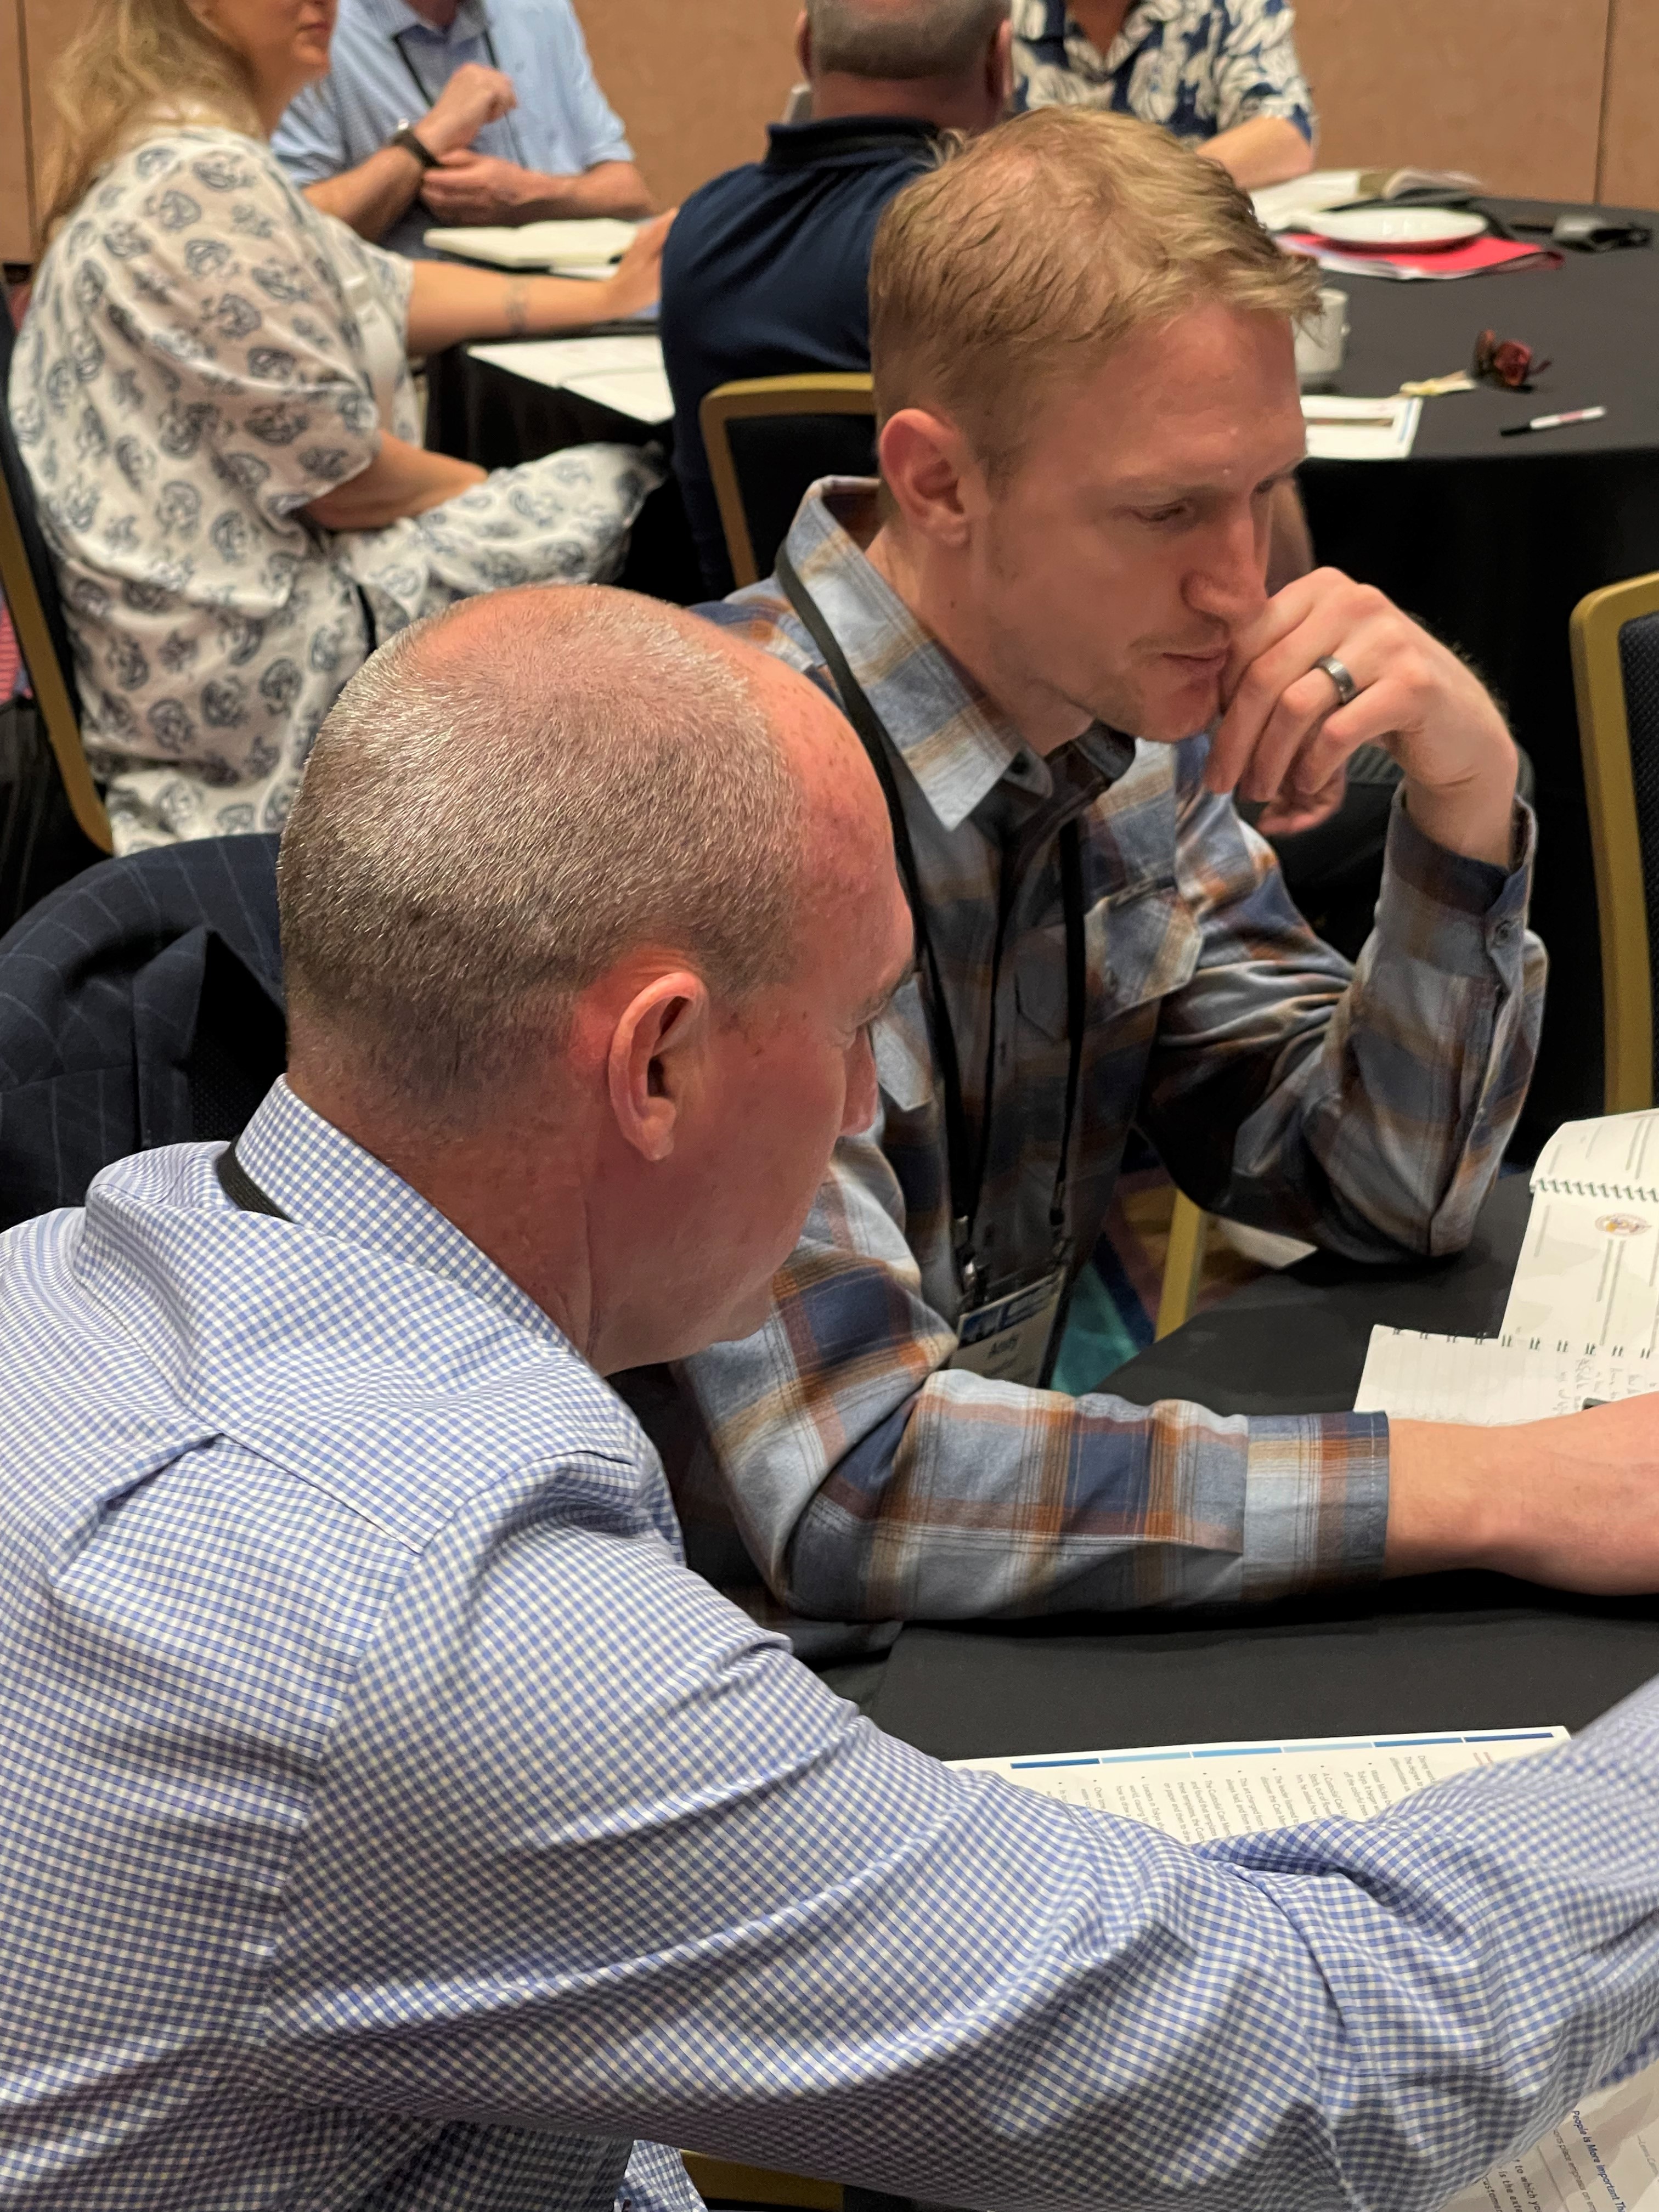 Nathan Redman, vice president of sales, Kinetics Noise Control Inc., (left) and Andy Bosscher, regional sales manager, Twin City Fan & Blower, take part in a small-group discussion during one of the keynote sessions the morning of March 3.